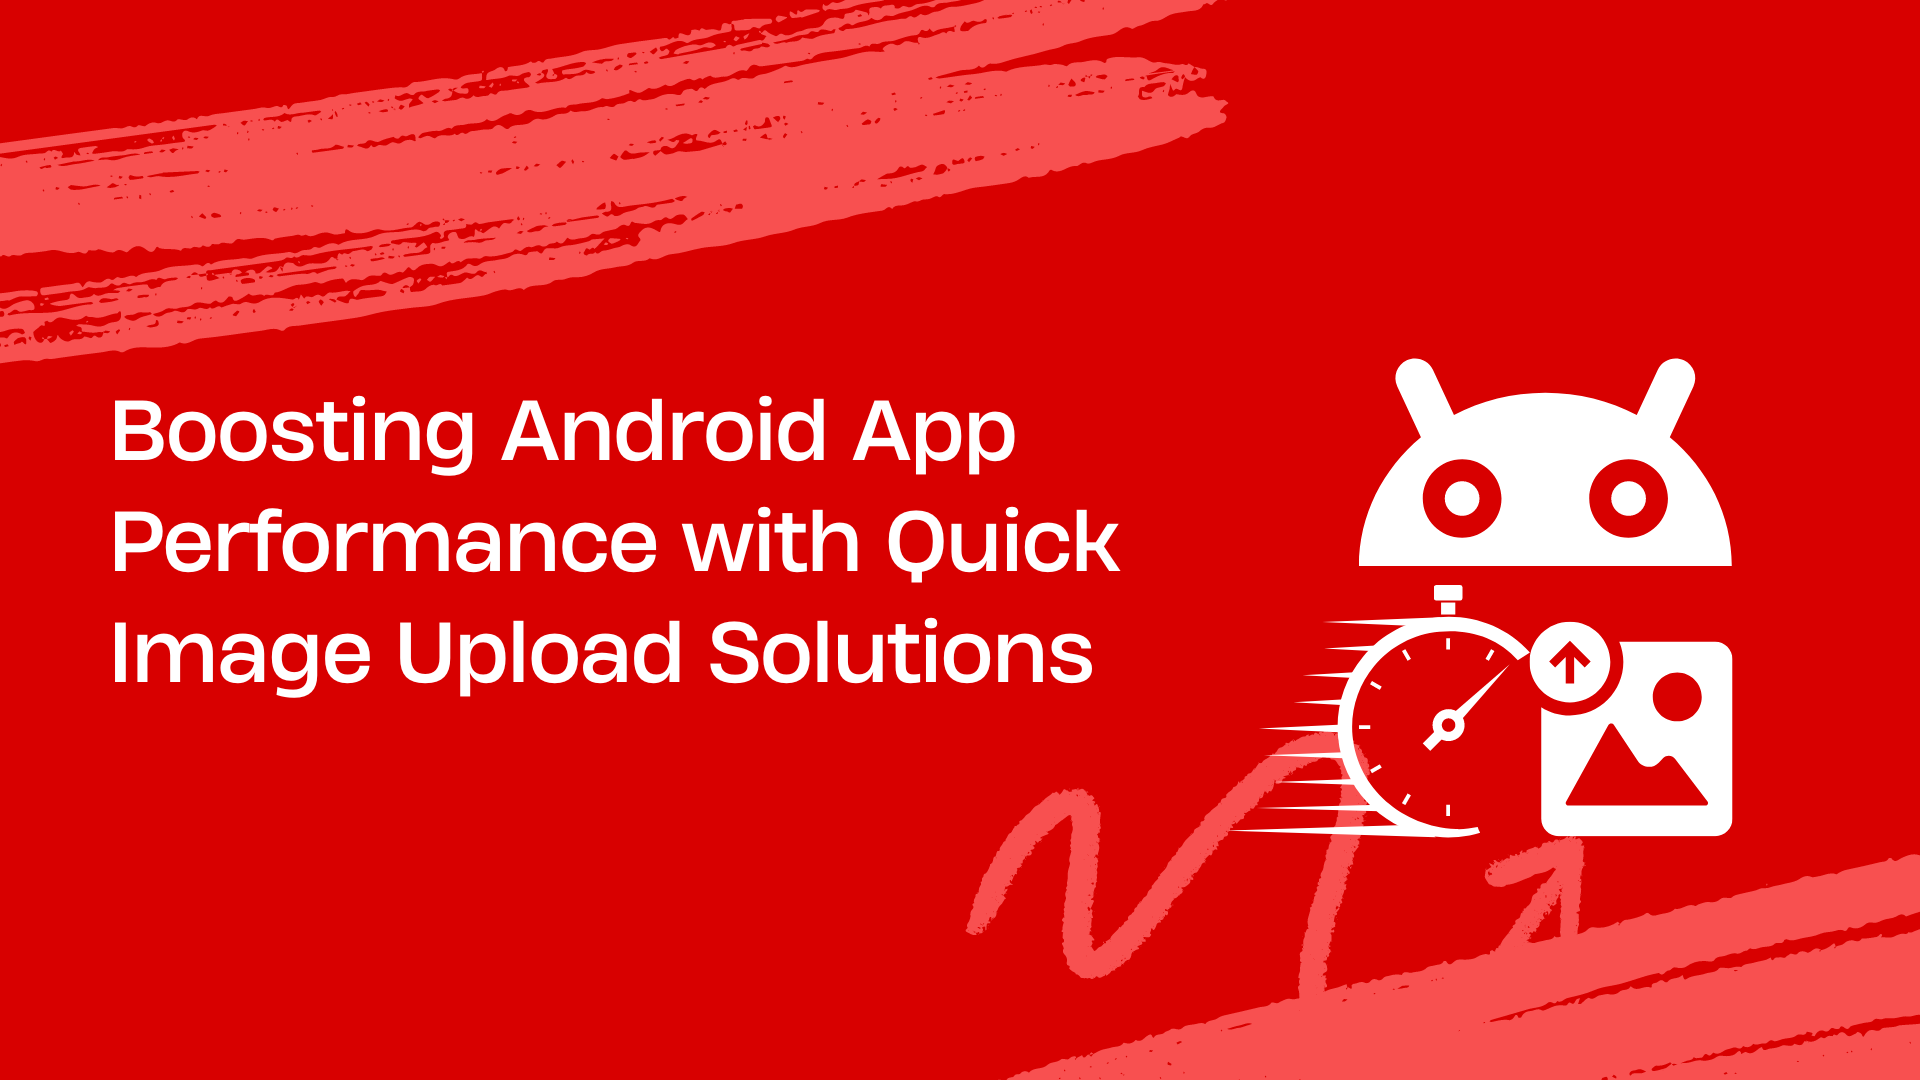 Boosting Android App Performance with Quick Image Upload Solutions